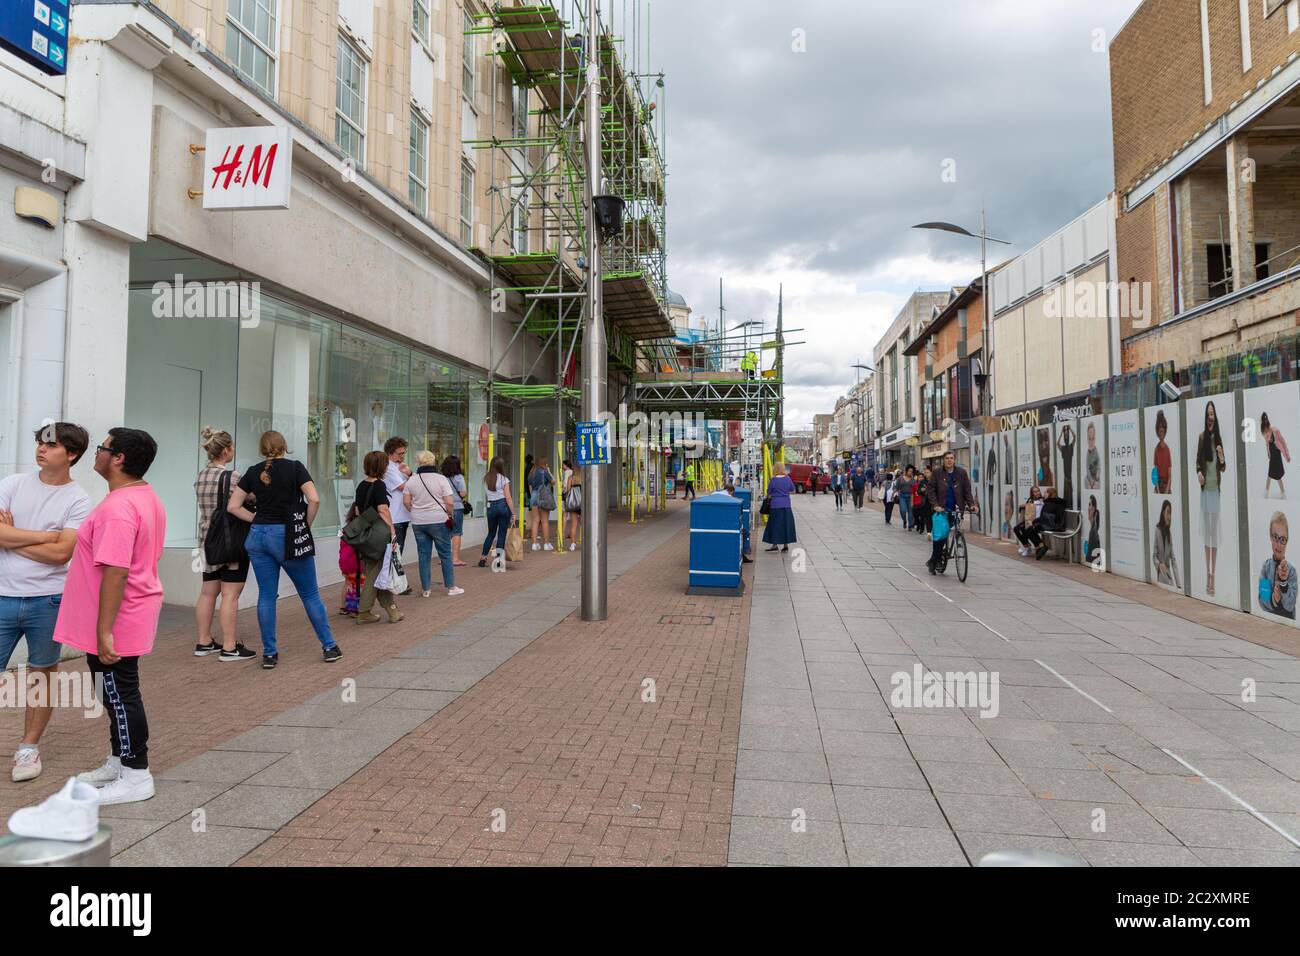 Southend-on-Sea, UK. 18th June, 2020. Shoppers queue outside H&M. Social  distancing measures on the High Street in Southend-on-Sea. The Council has  tried to introduce a one way system for the pedestrianised area